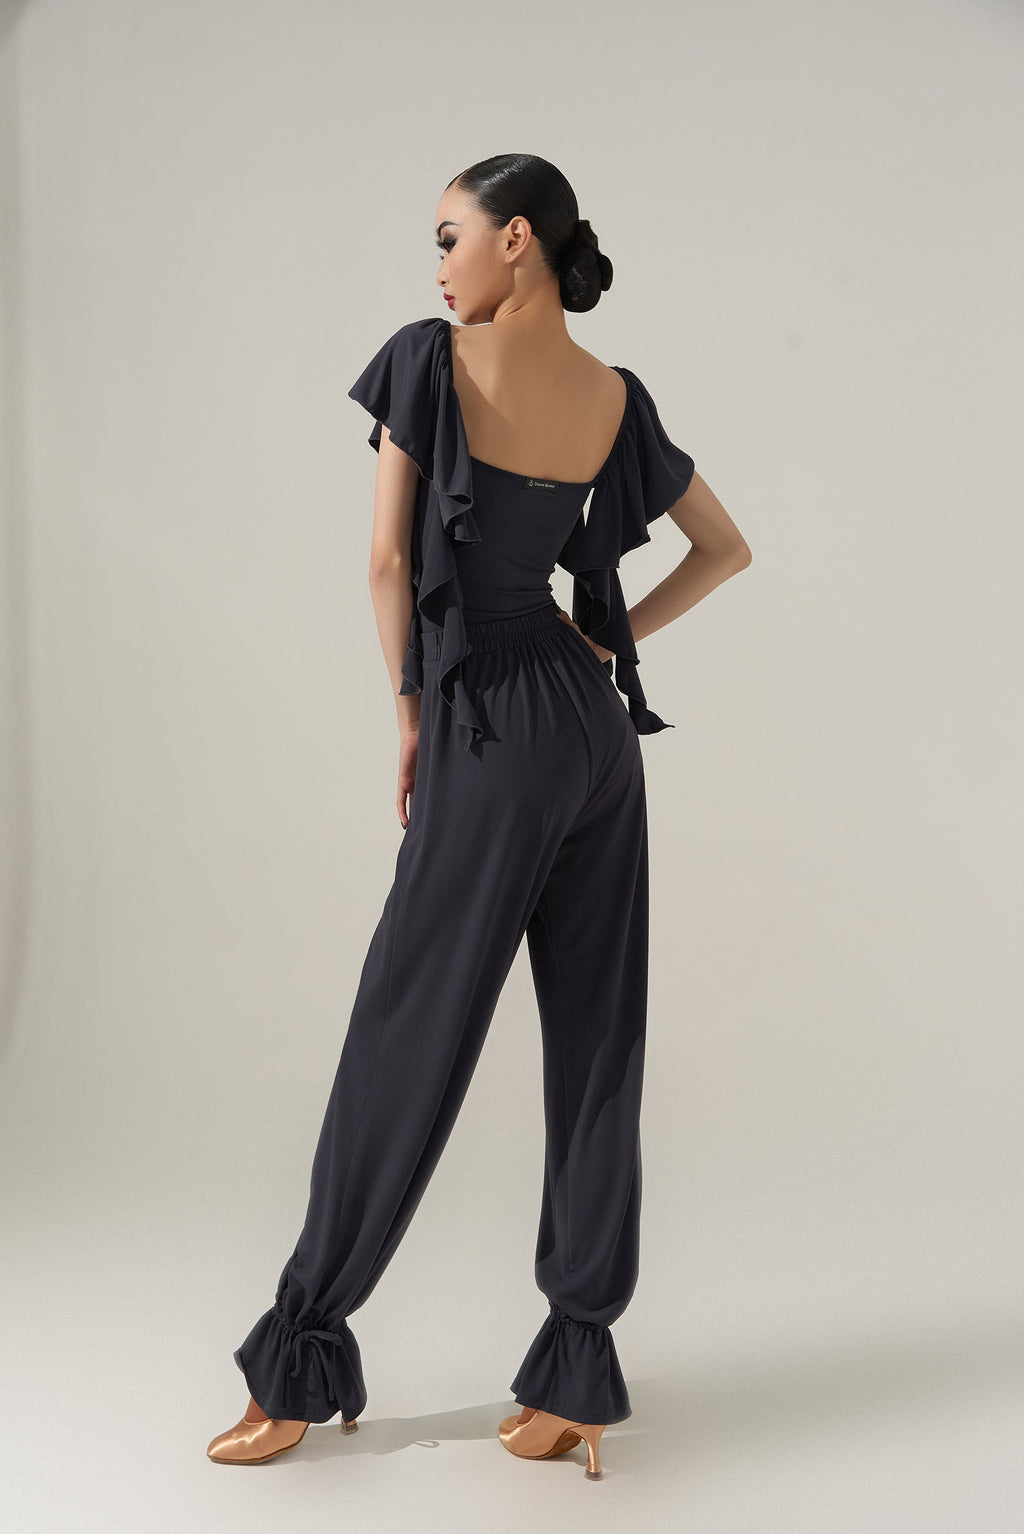 DQ-266  DANCE QUEEN Black Ankle Strap Trousers